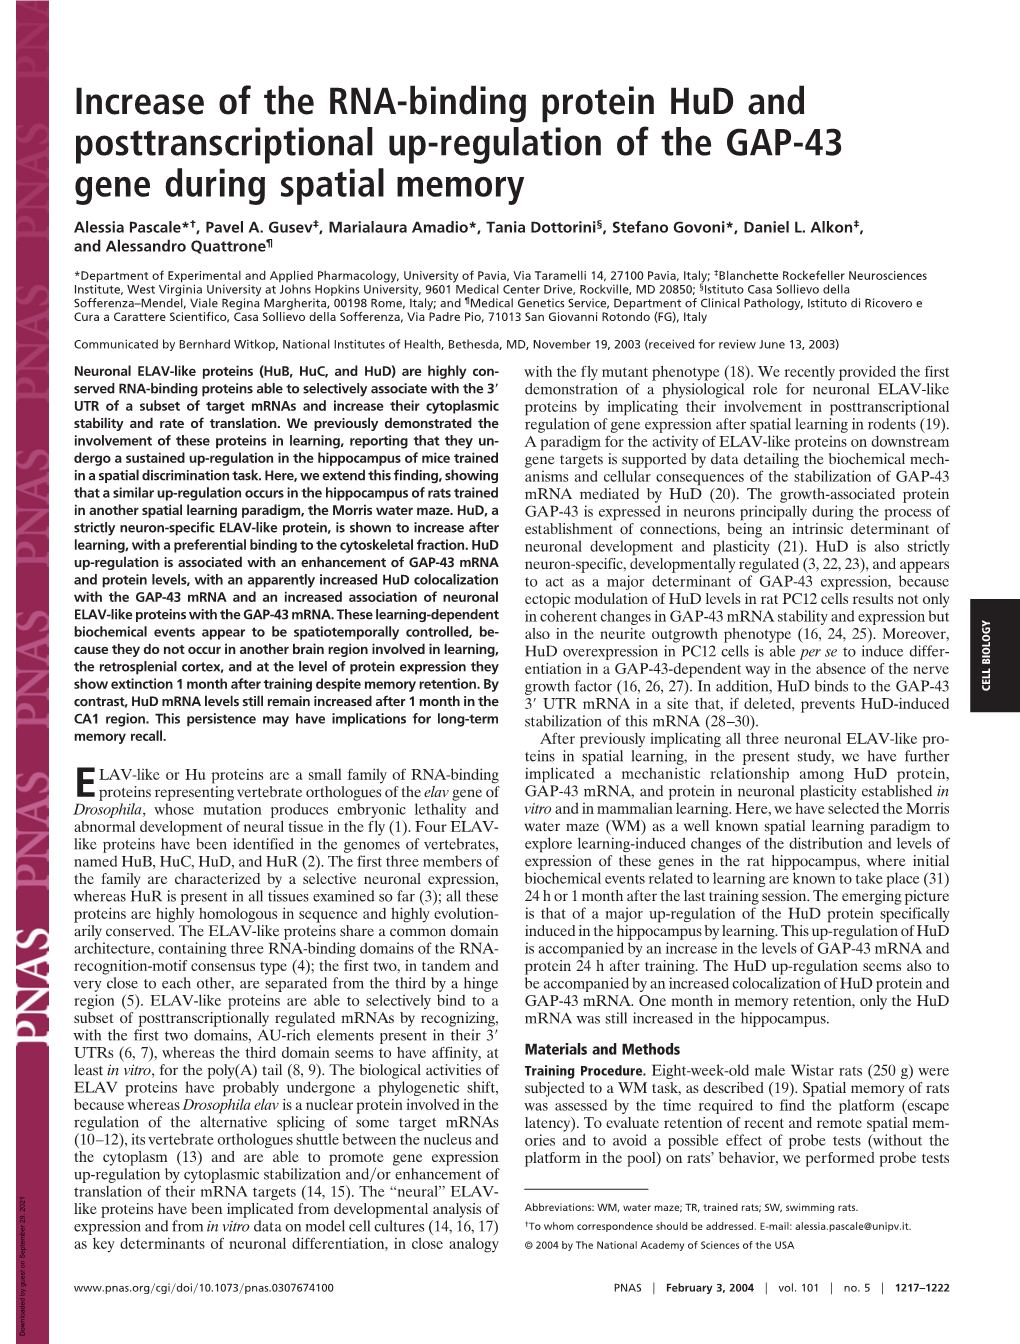 Increase of the RNA-Binding Protein Hud and Posttranscriptional Up-Regulation of the GAP-43 Gene During Spatial Memory